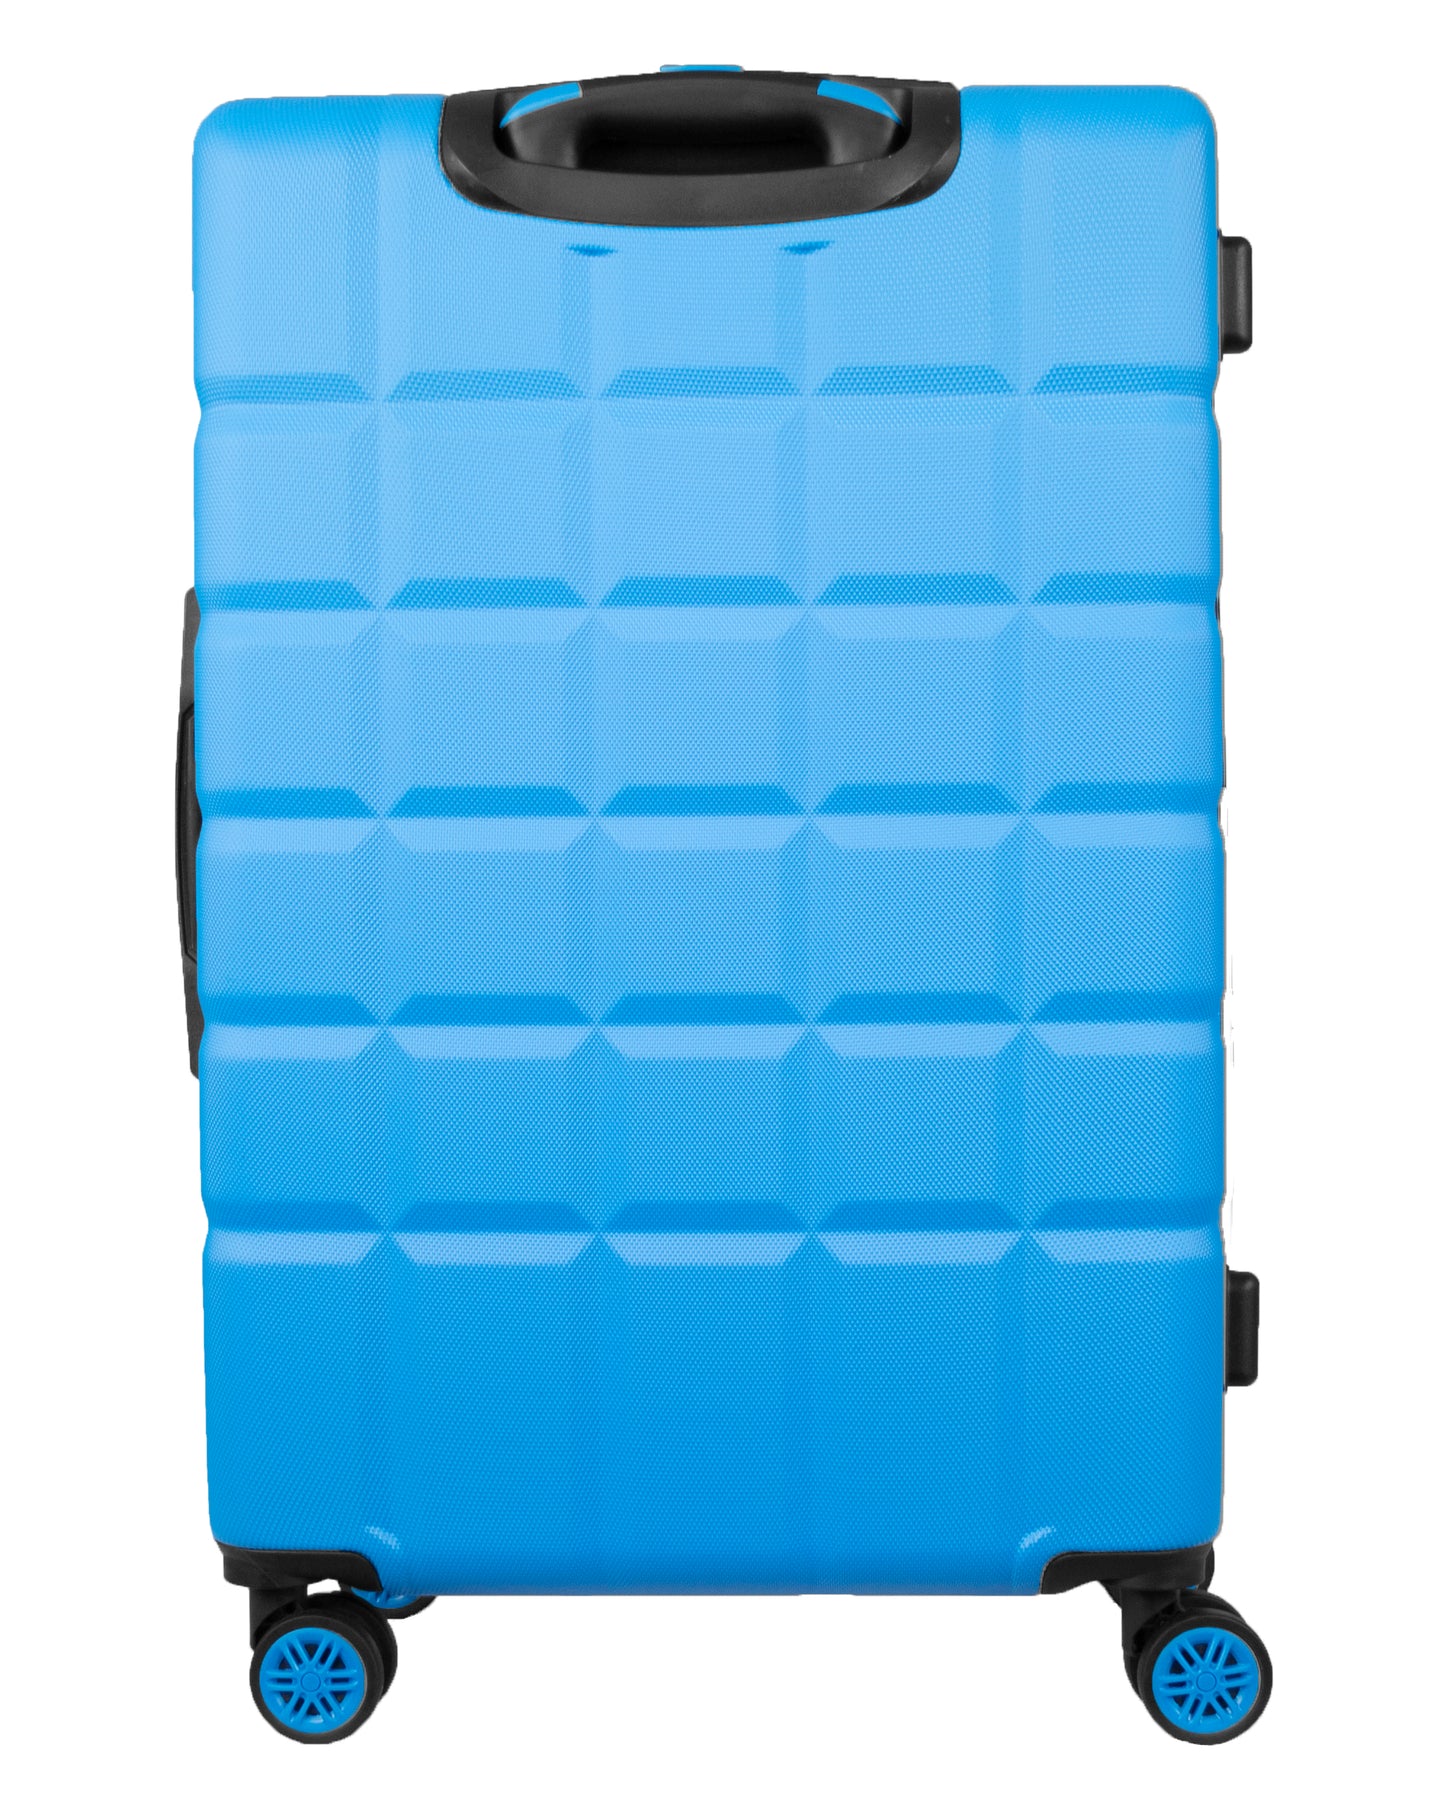 Hard Shell Luggage with 4 Spinner Wheels, Blue